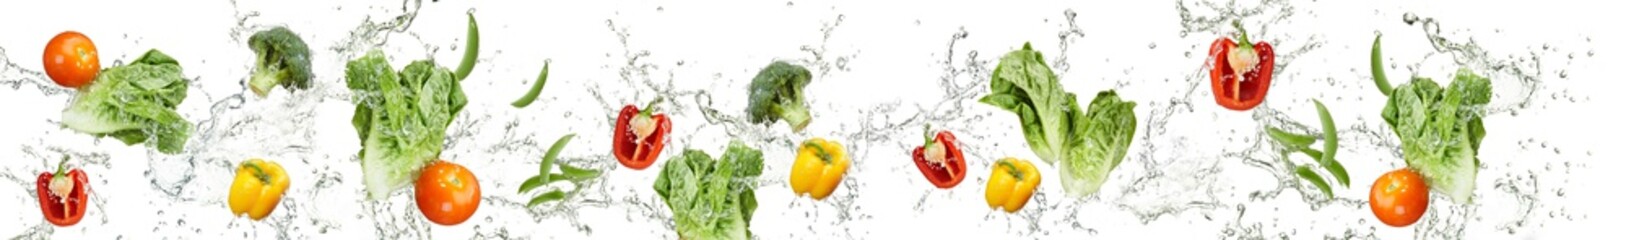 Vegetables on the background of water, apron